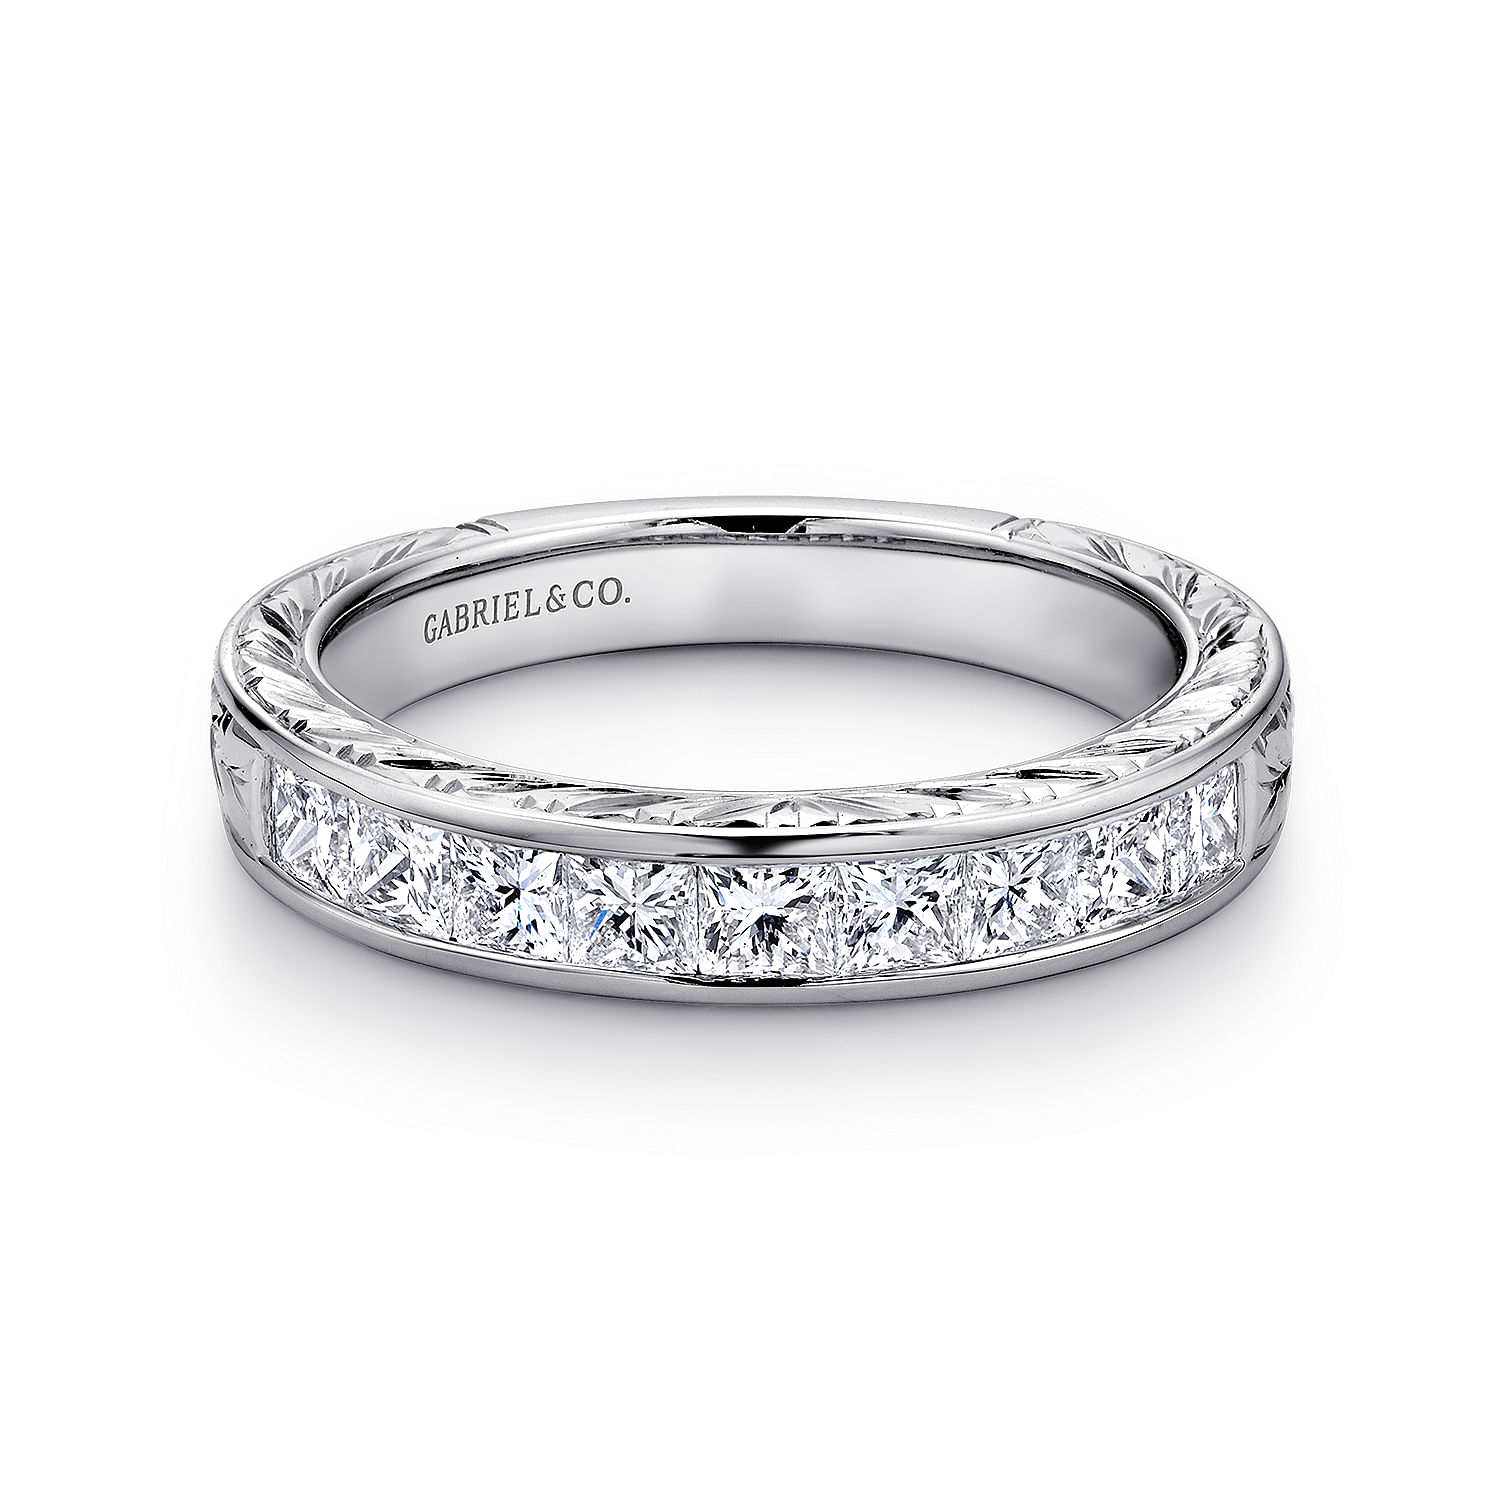 Cesaire - 14K White Gold Princess Cut 9 Stone Channel Set Diamond Wedding Band with Engraving